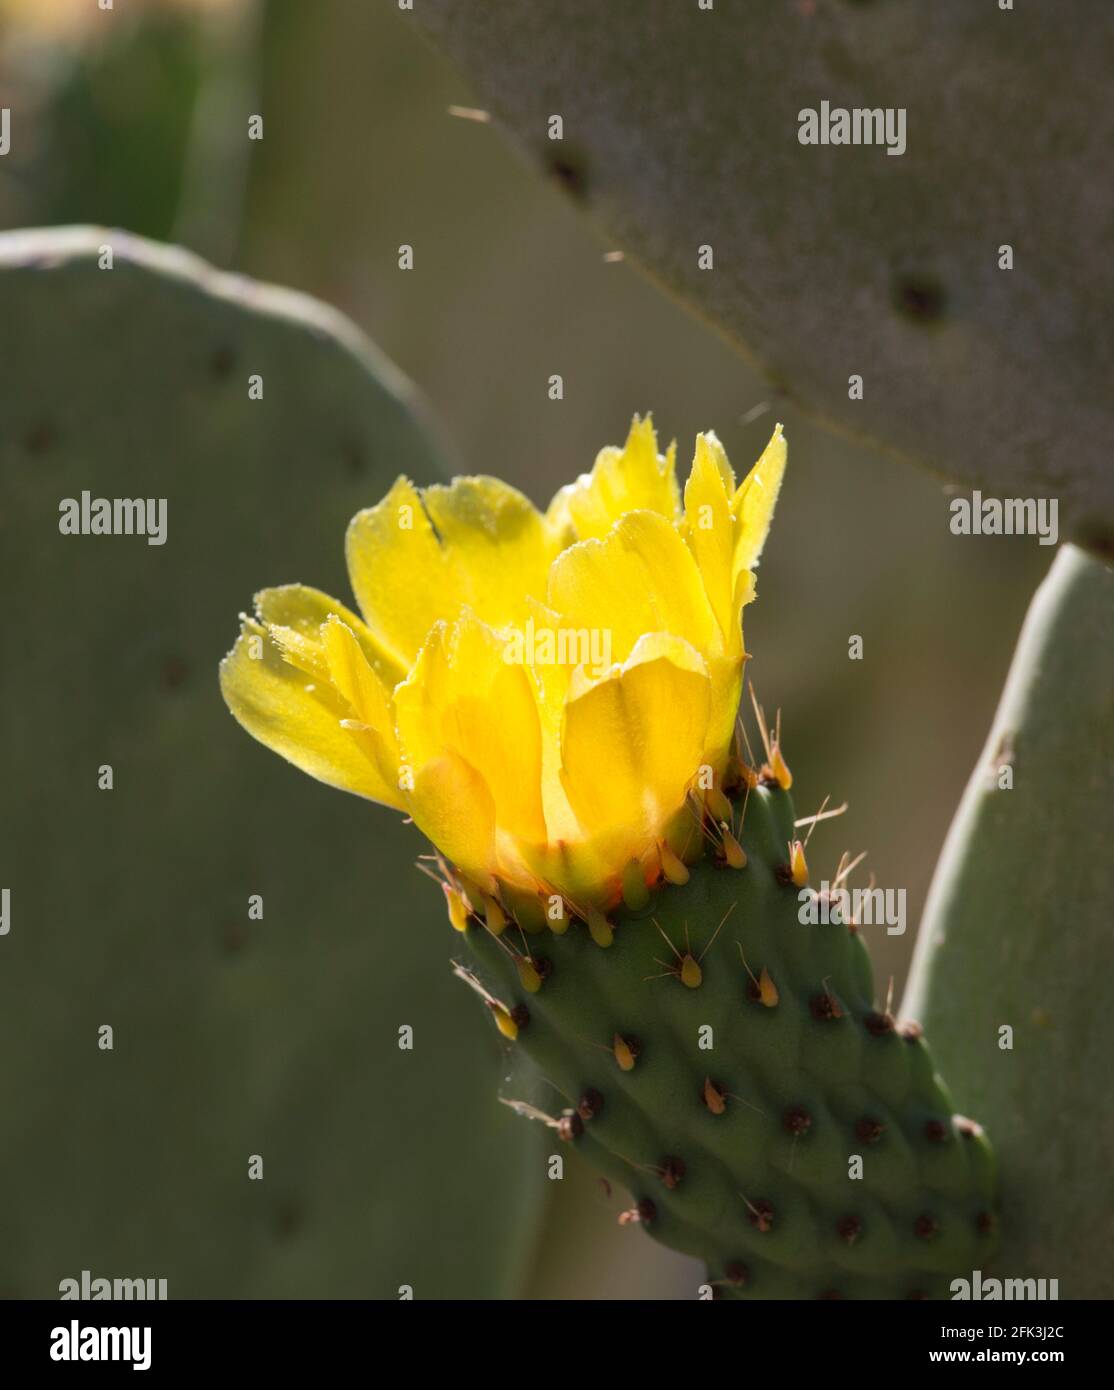 Agrigento, Sicily, Italy. Bright yellow flower of a prickly pear cactus, Opuntia ficus-indica, Valley of the Temples. Stock Photo